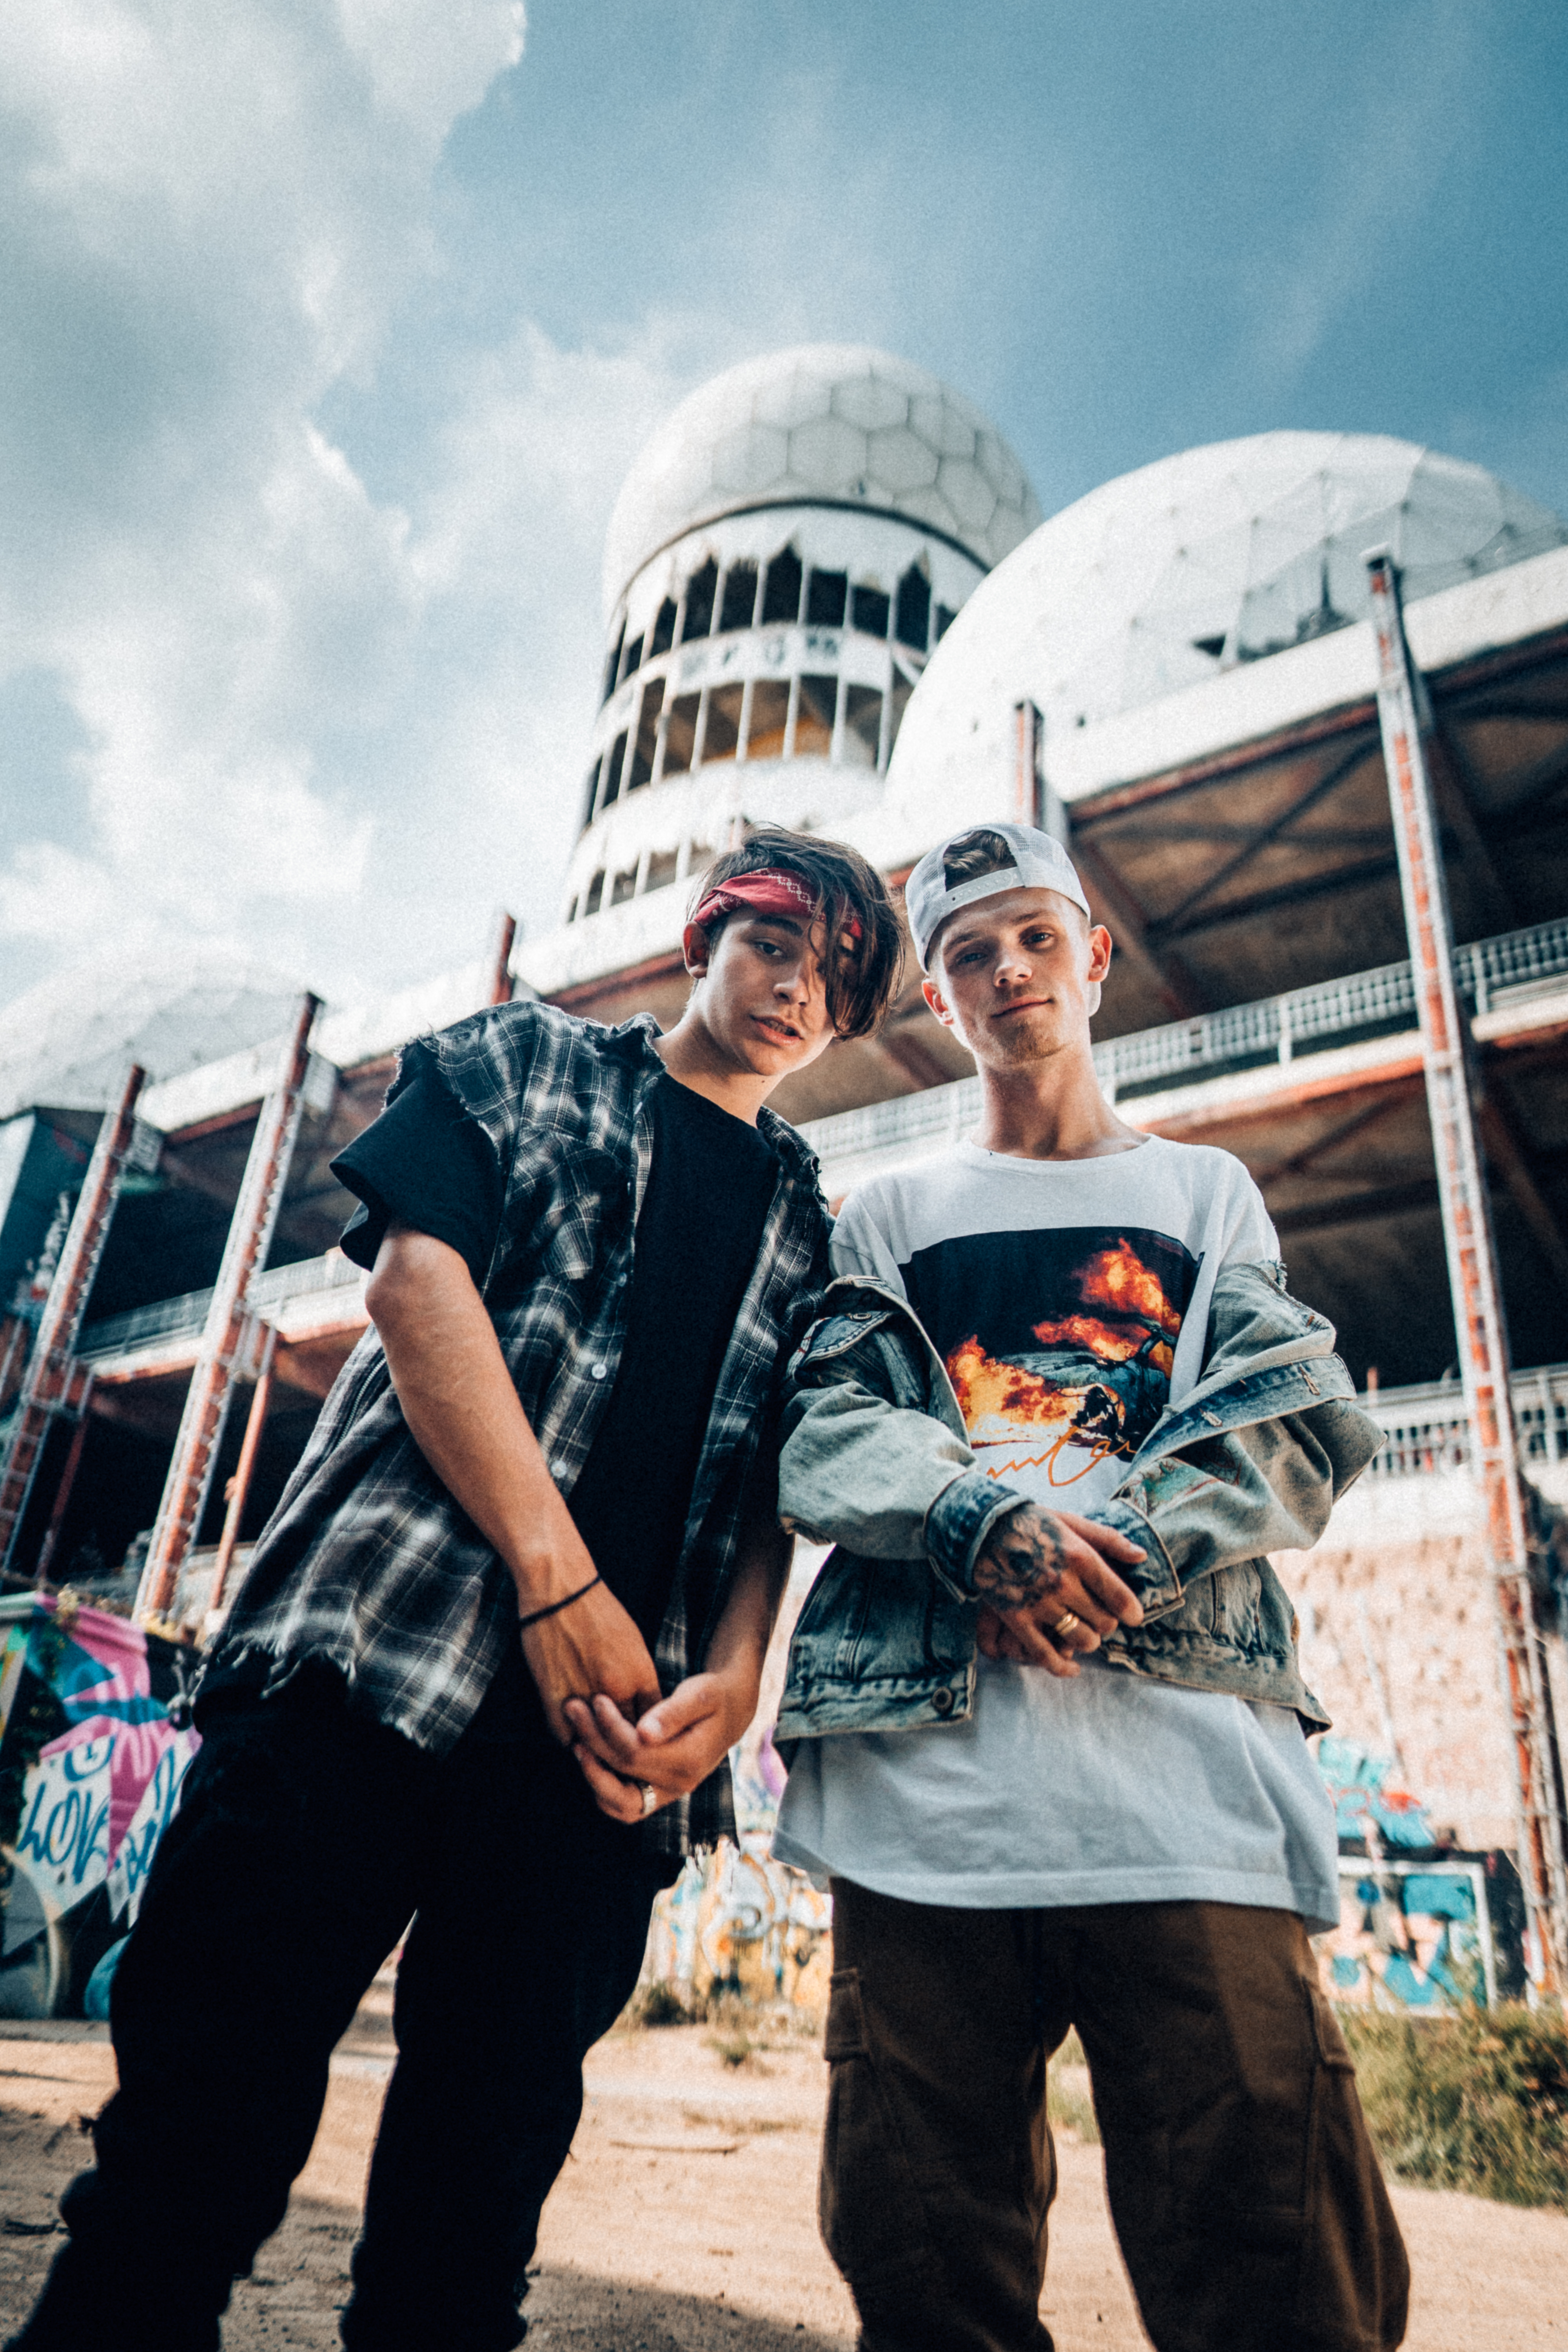 Bars And Melody Open Up About The Creative Process Behind New Album Sadboi Celeb Secrets